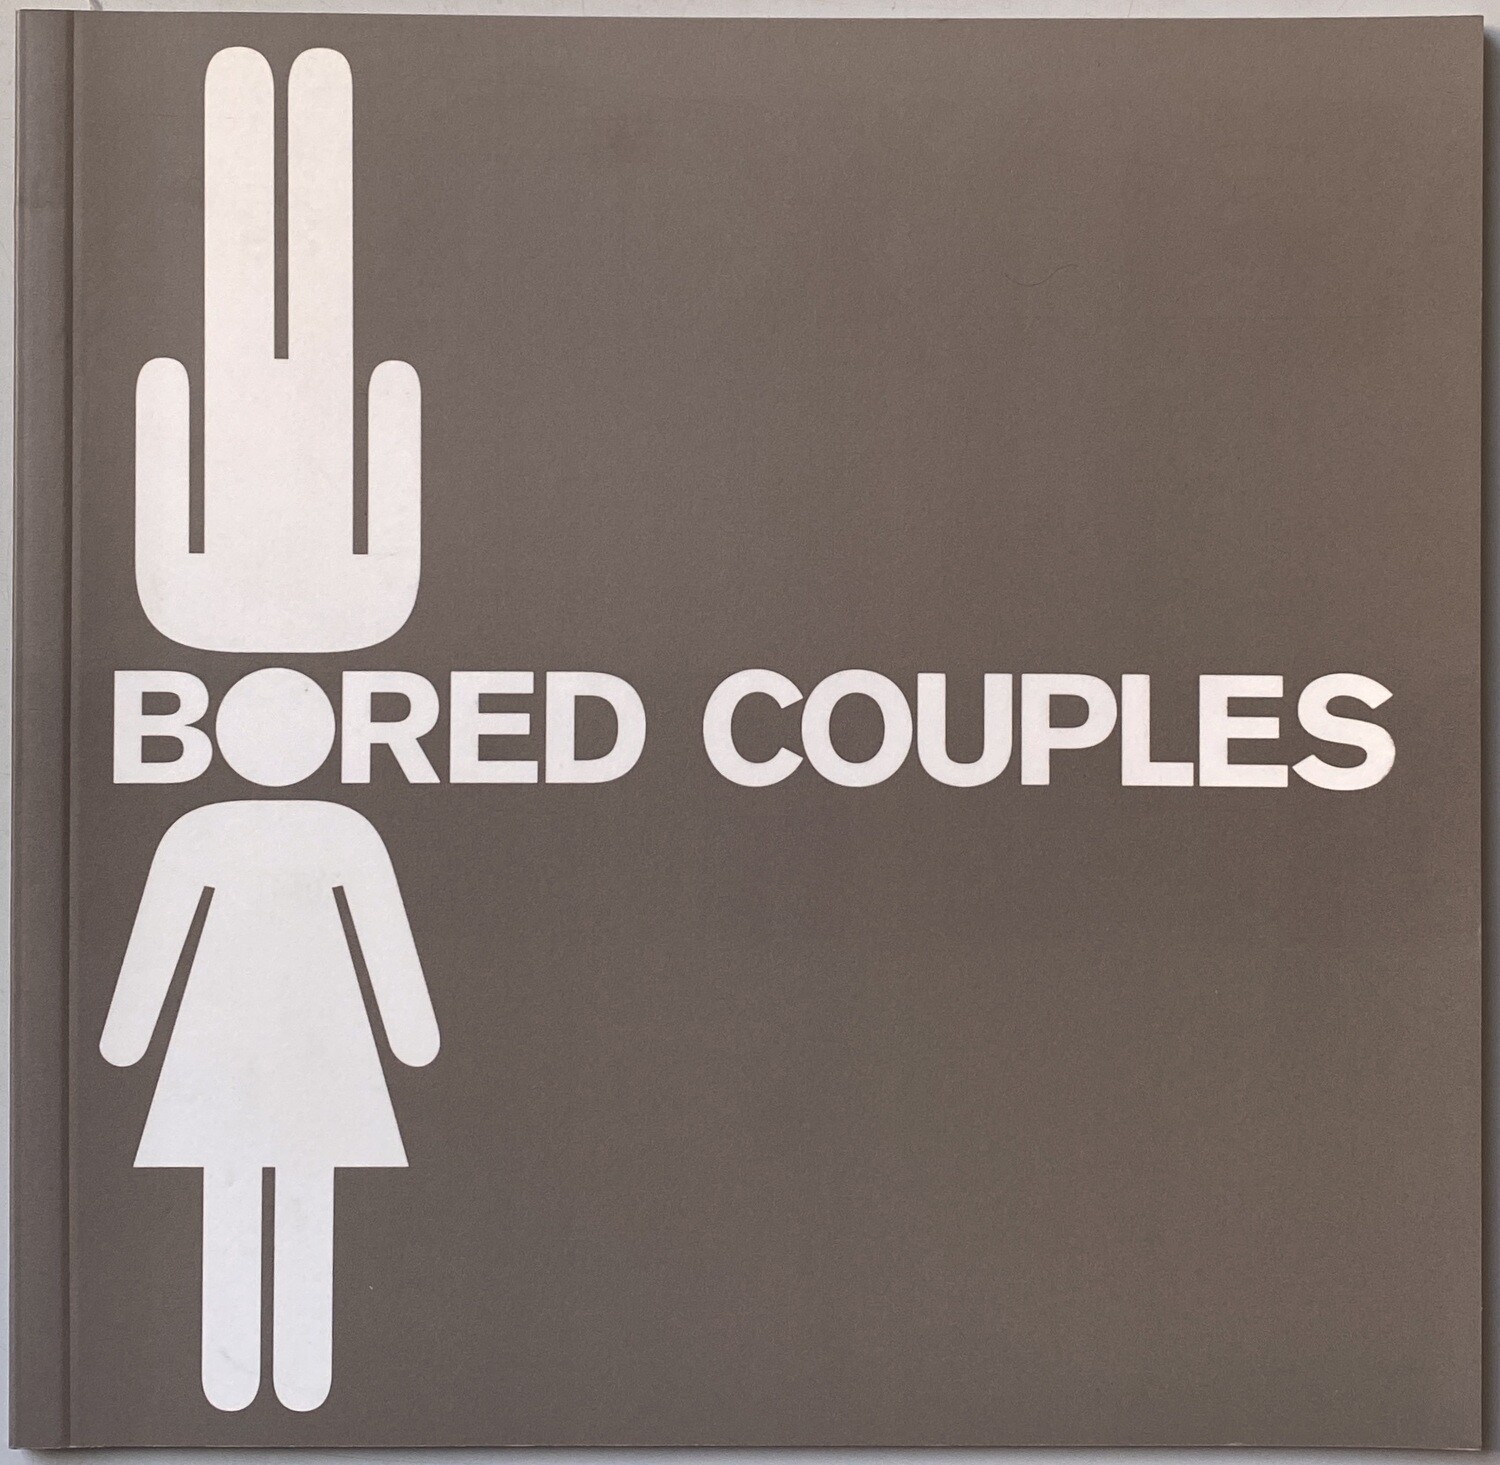 [SIGNED] MARTIN PARR BORED COUPLES